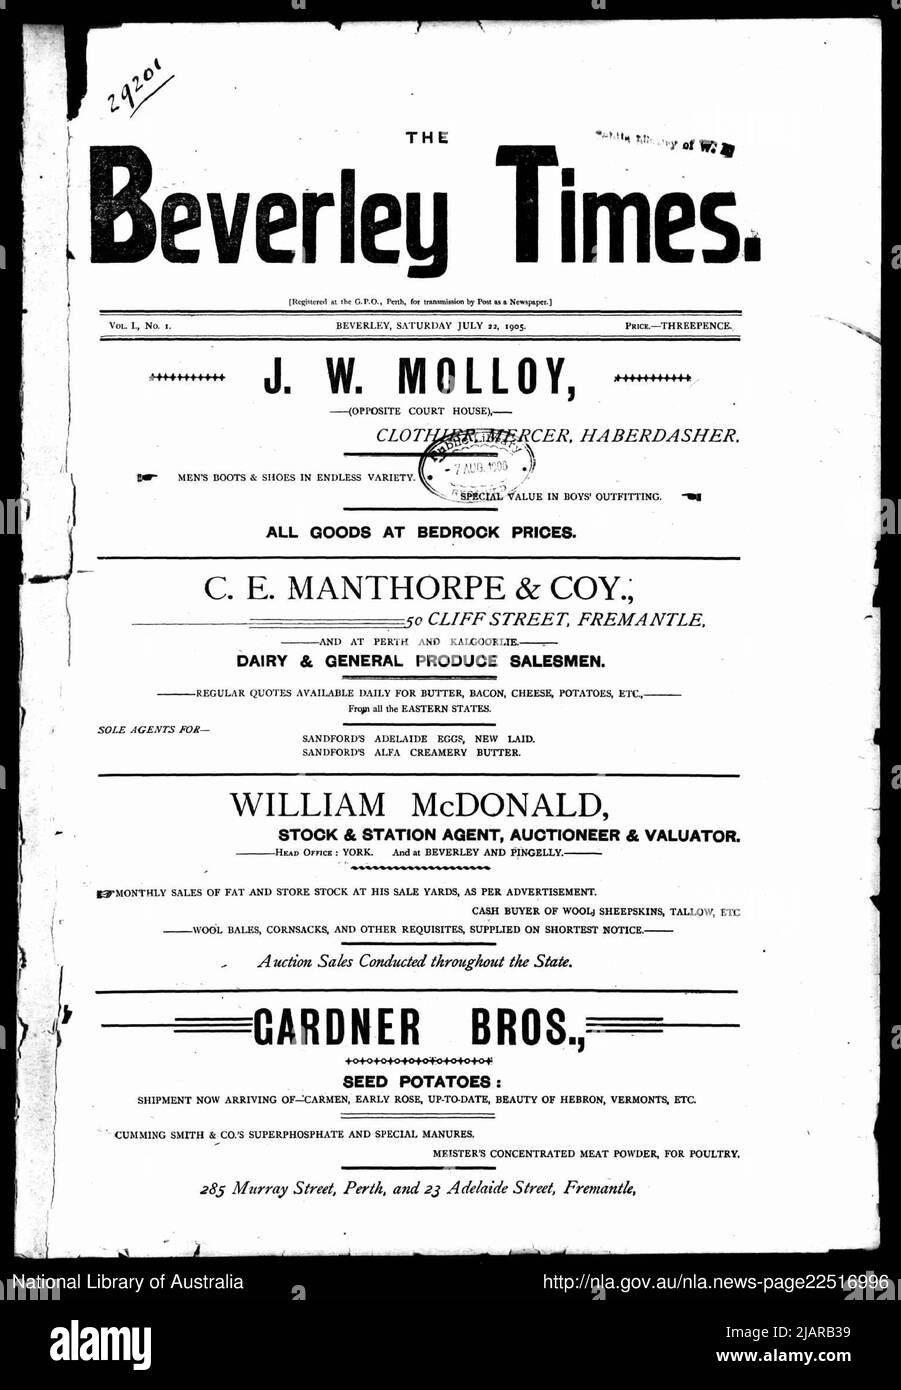 The front page of first issue of The Beverley Times ca. 1905 Stock Photo